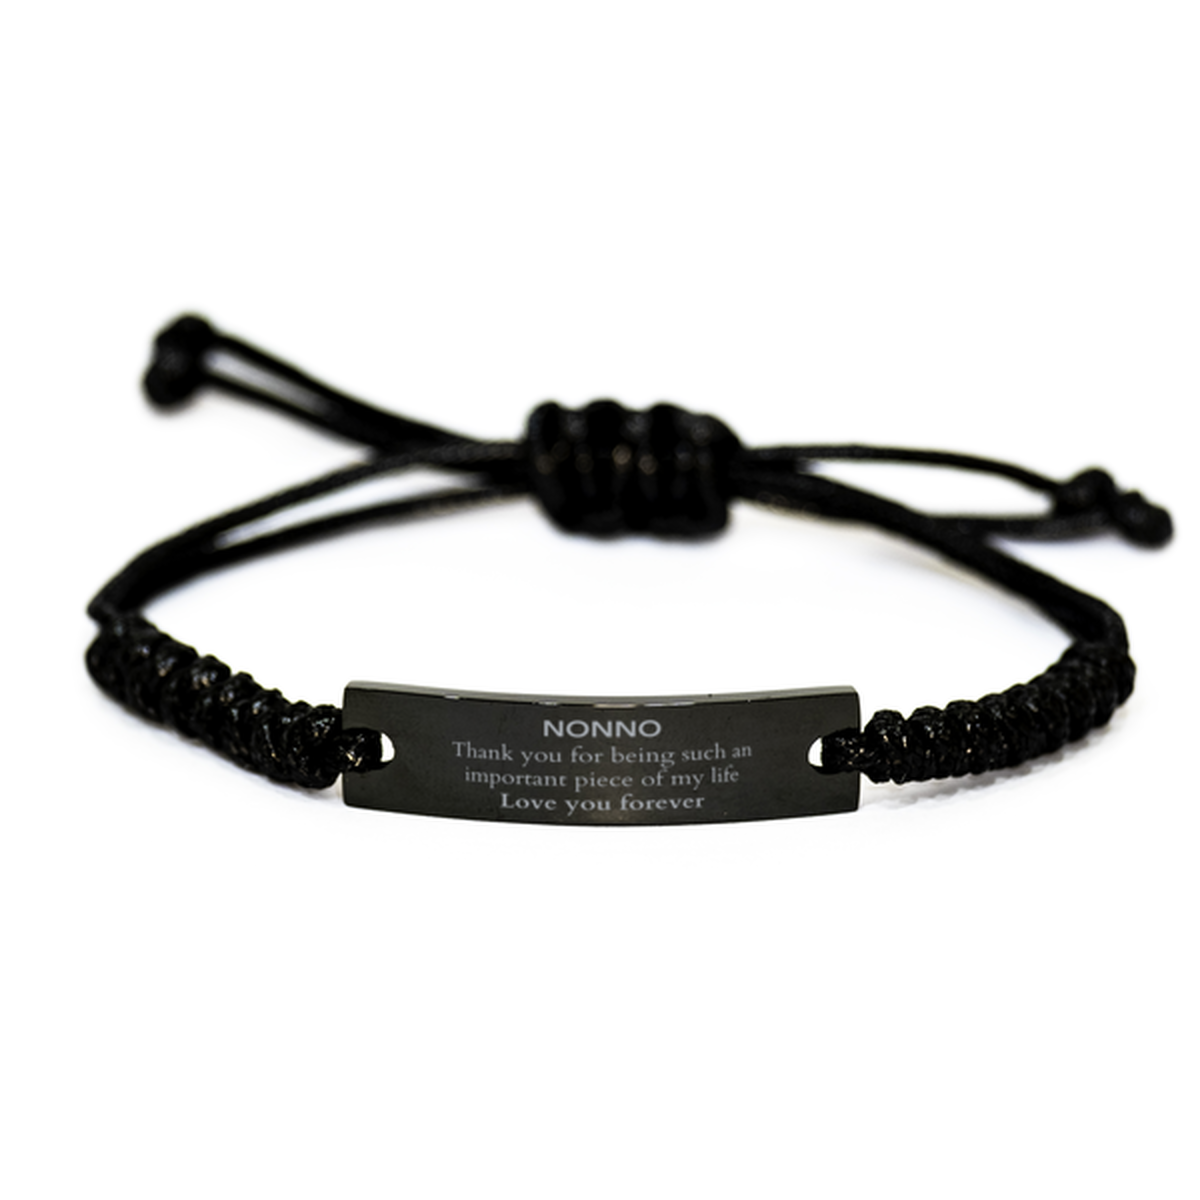 Appropriate Nonno Black Rope Bracelet Epic Birthday Gifts for Nonno Thank you for being such an important piece of my life Nonno Christmas Mothers Fathers Day